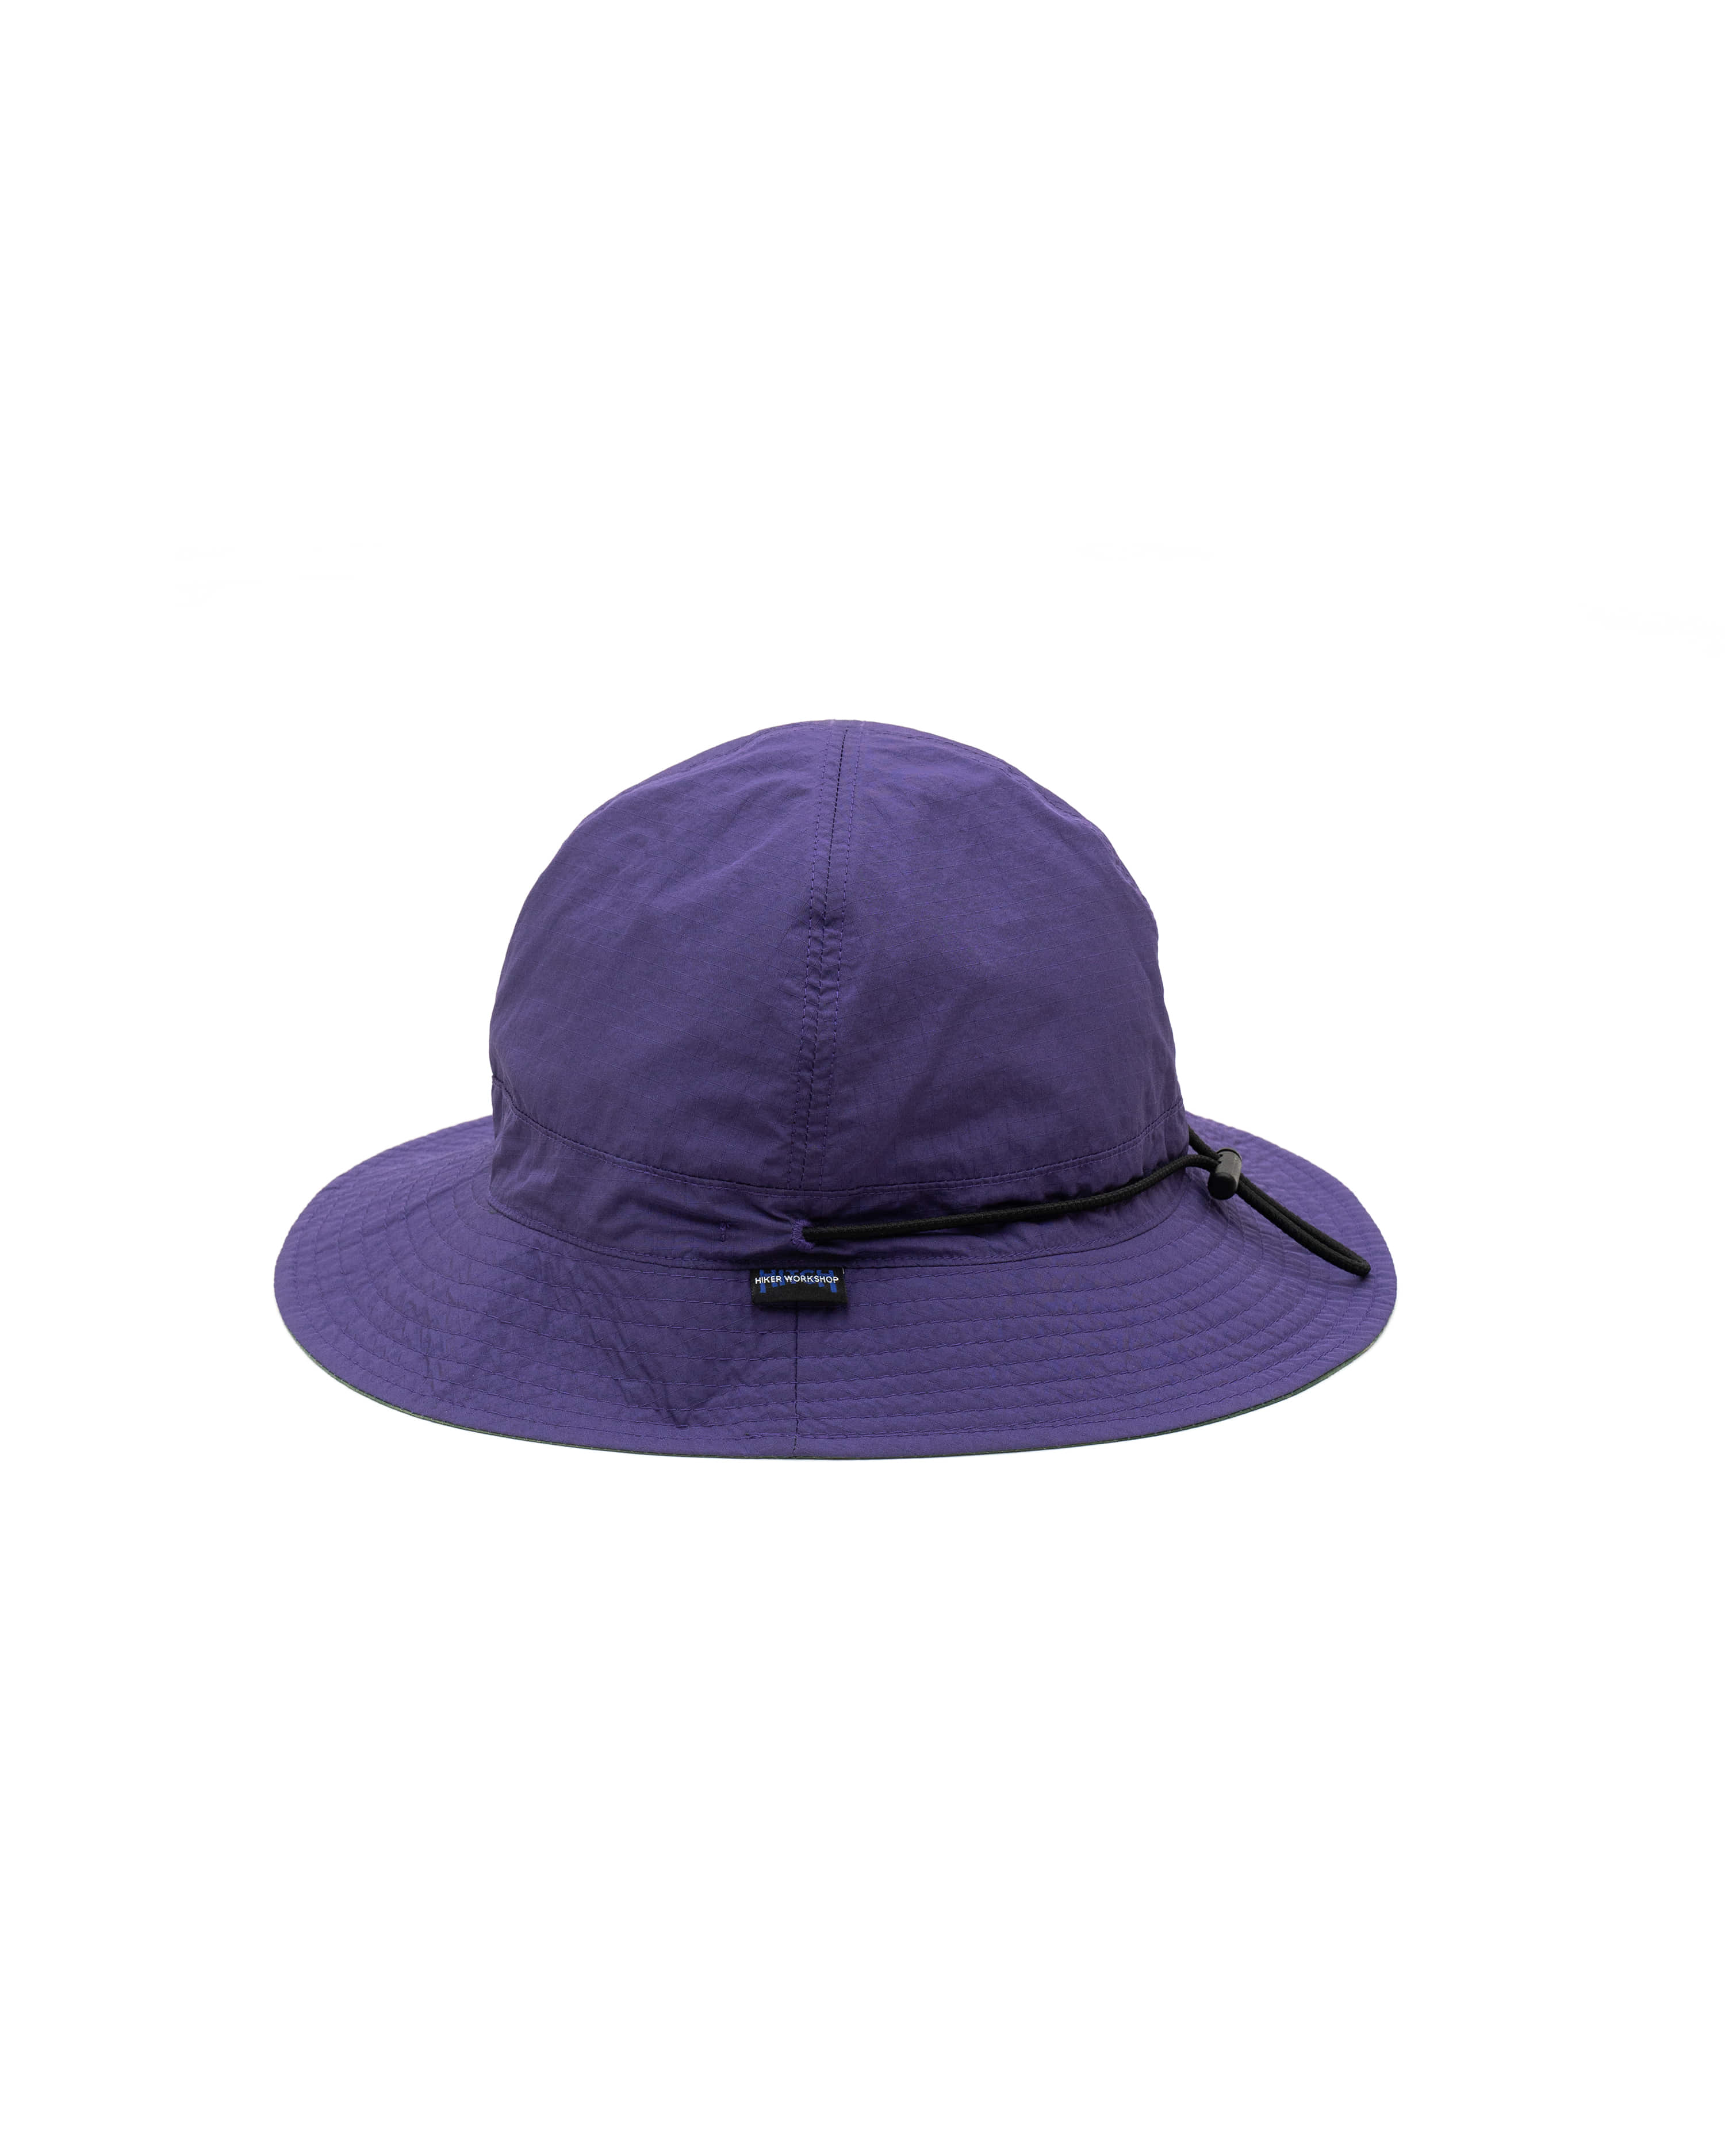 [out of stock] City 2 x HIKER WORKSHOP - Purple/Green (reversible)